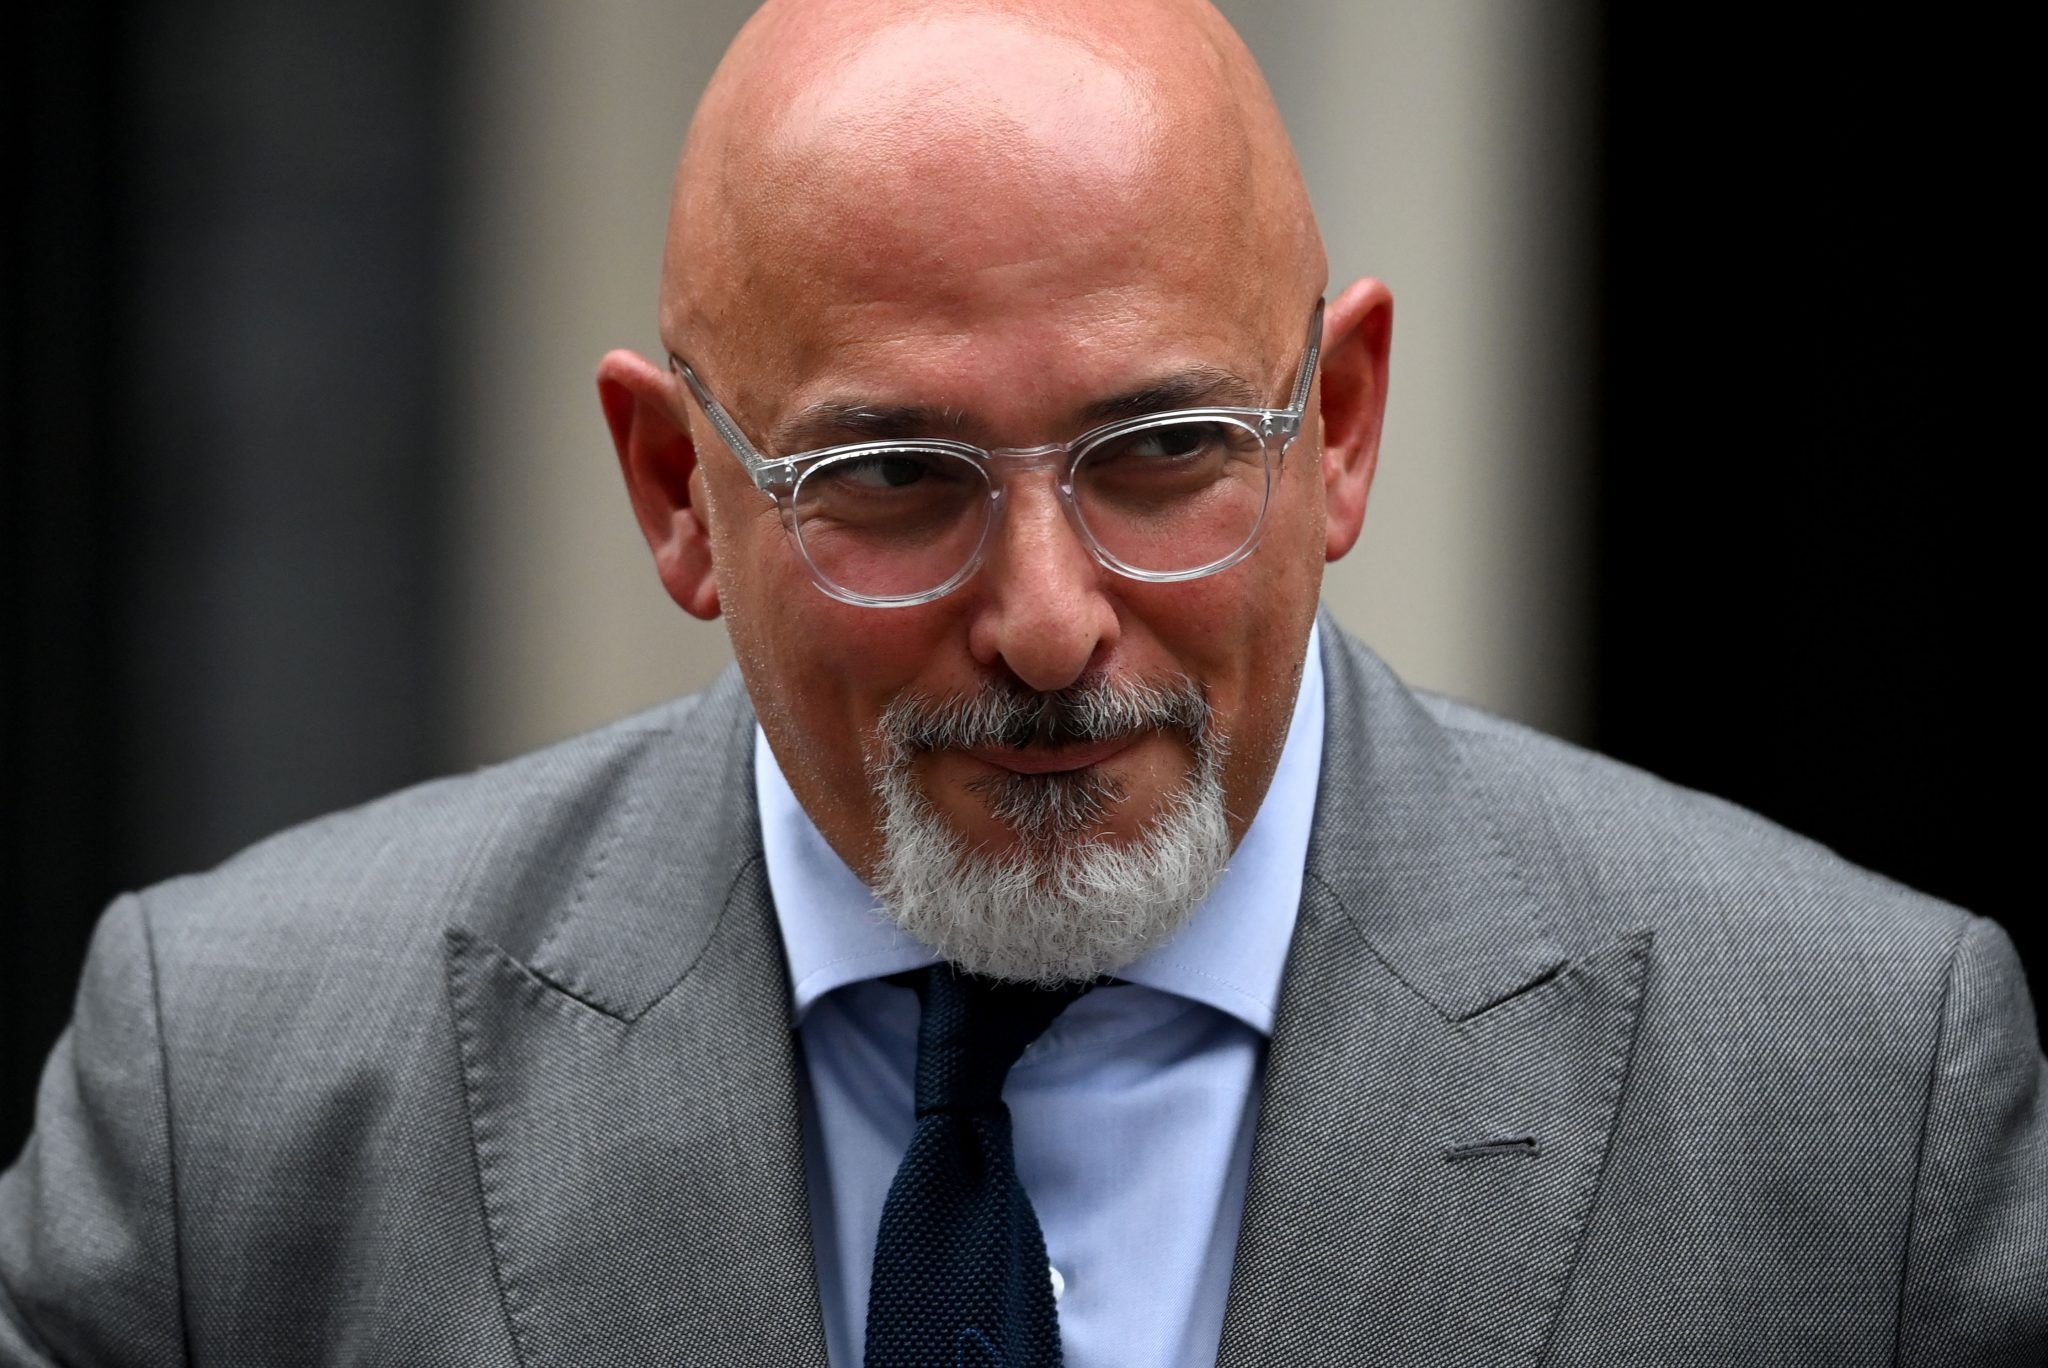 Nadhim Zahawi said he thinks the public will be uncomfortable with Starmer's "hypocrisy" (Credit: Getty)